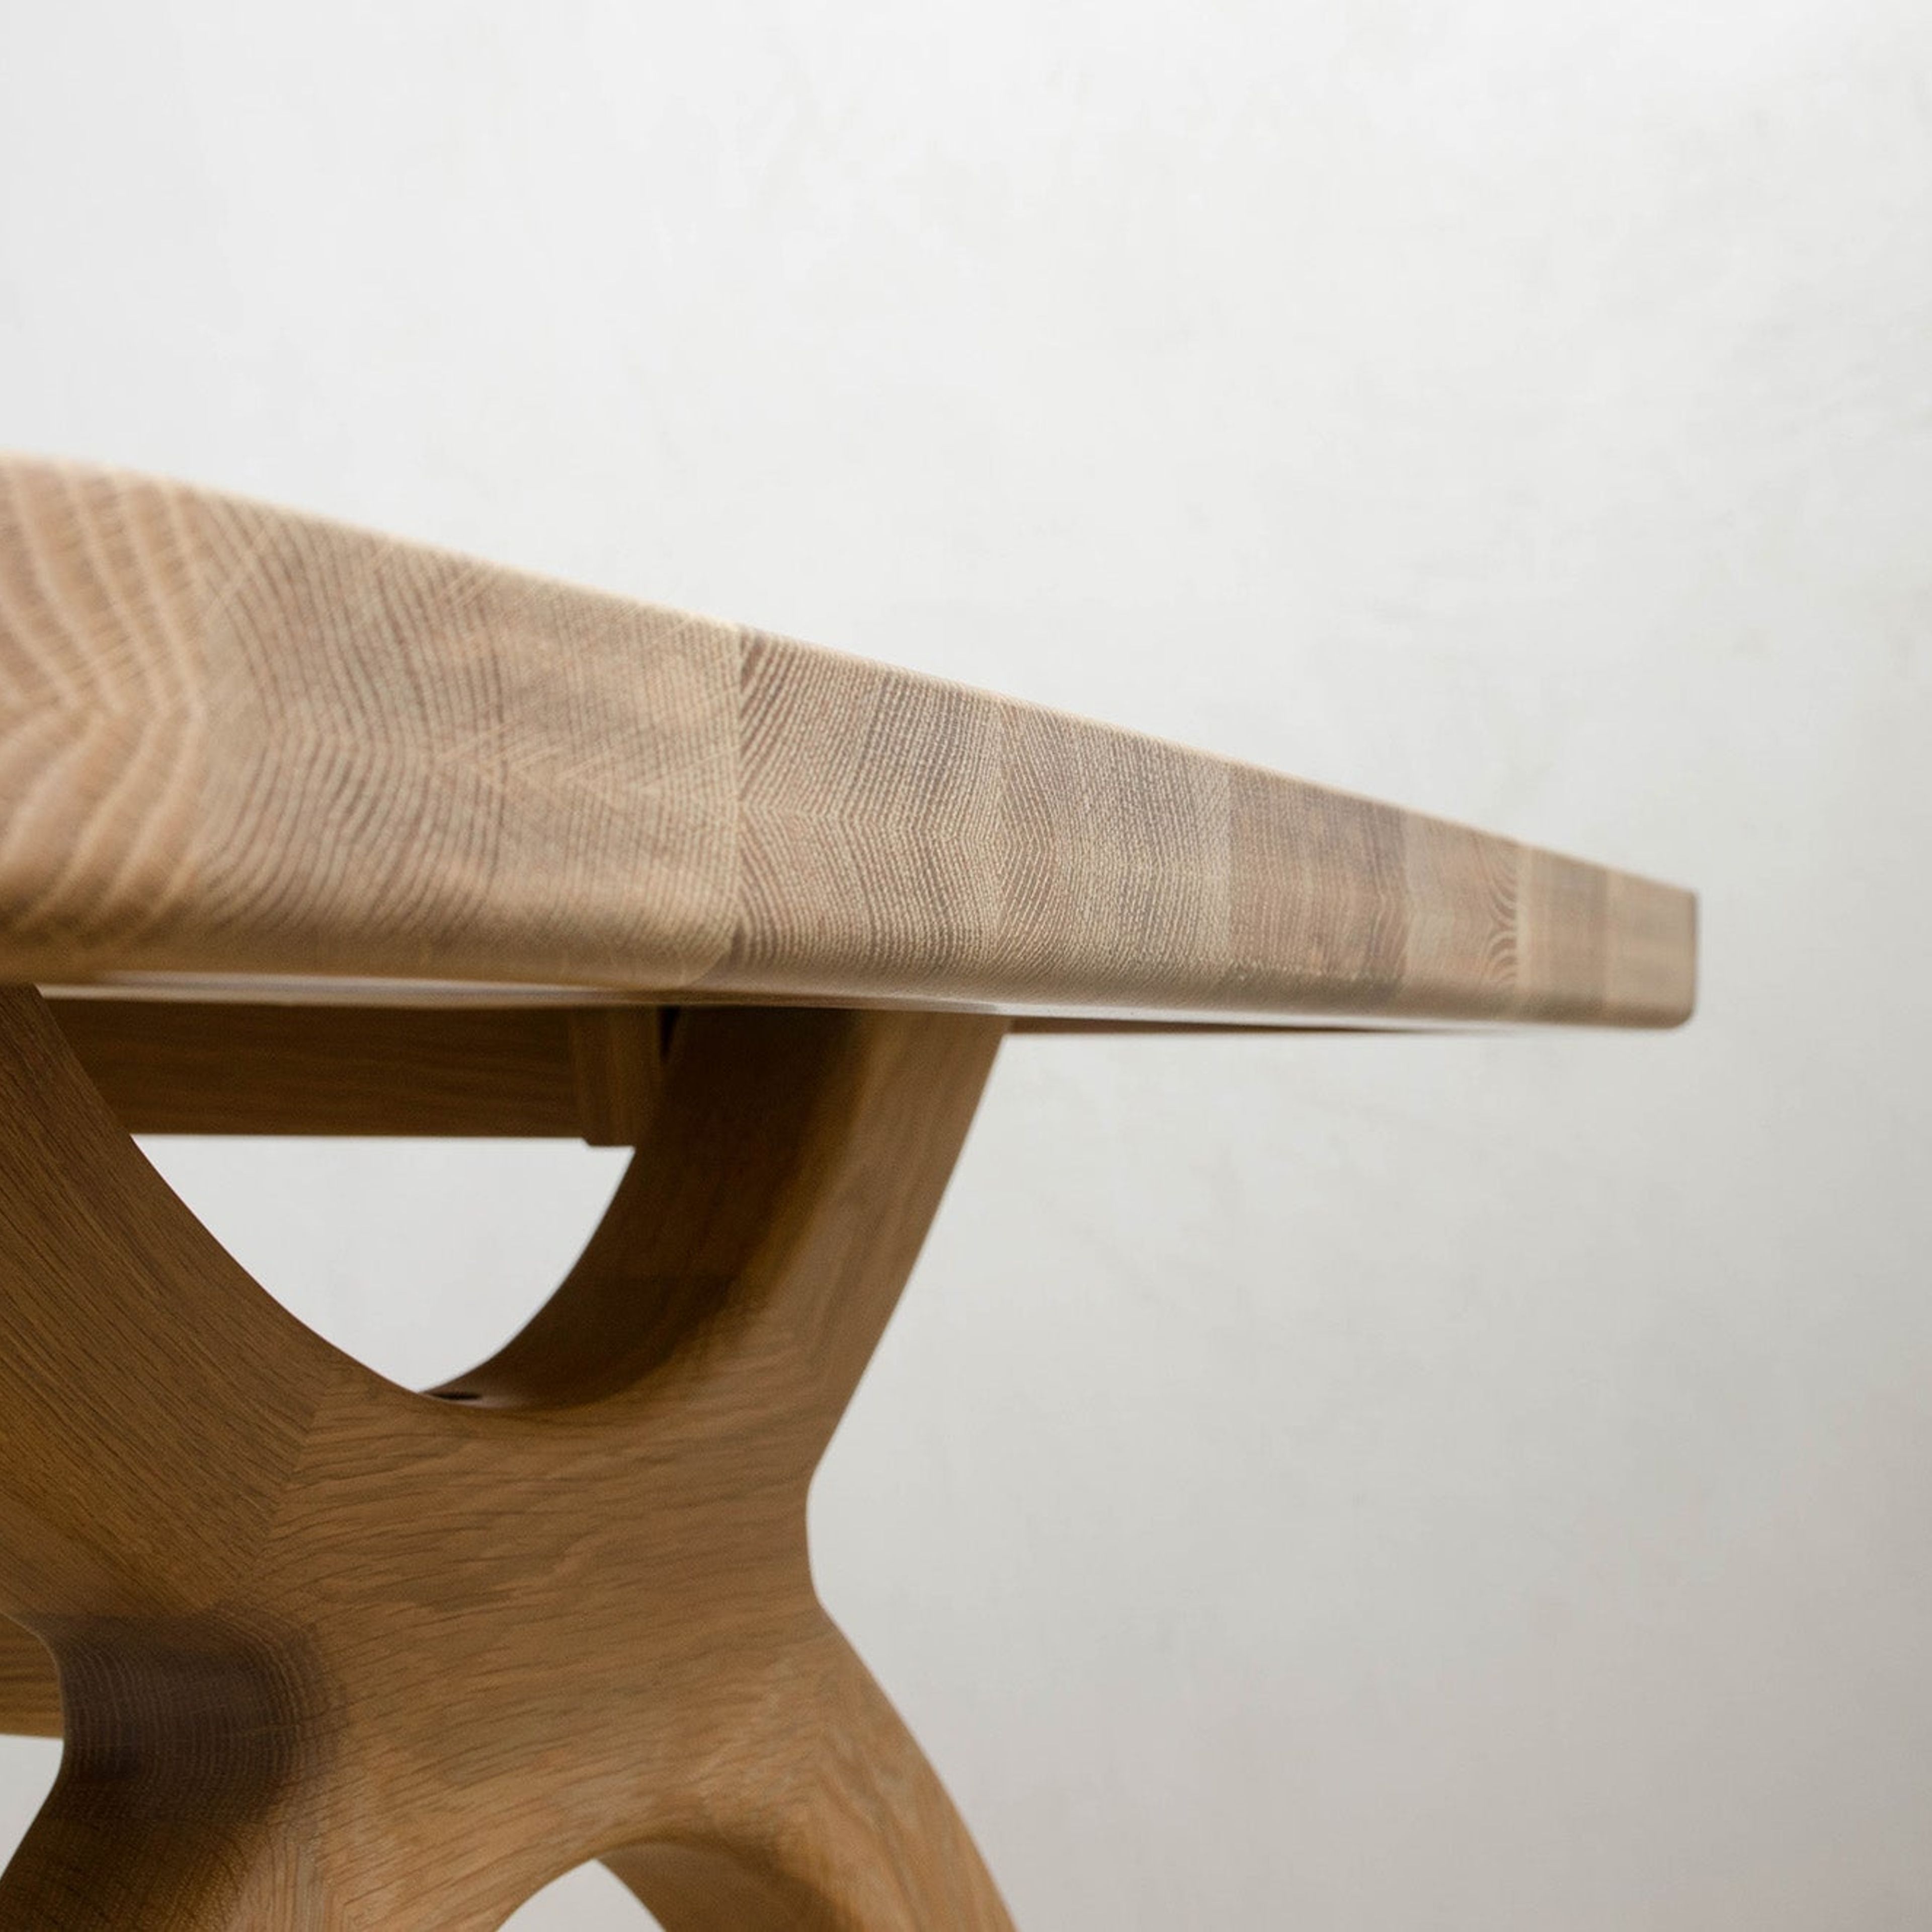 Inyo Dining Table